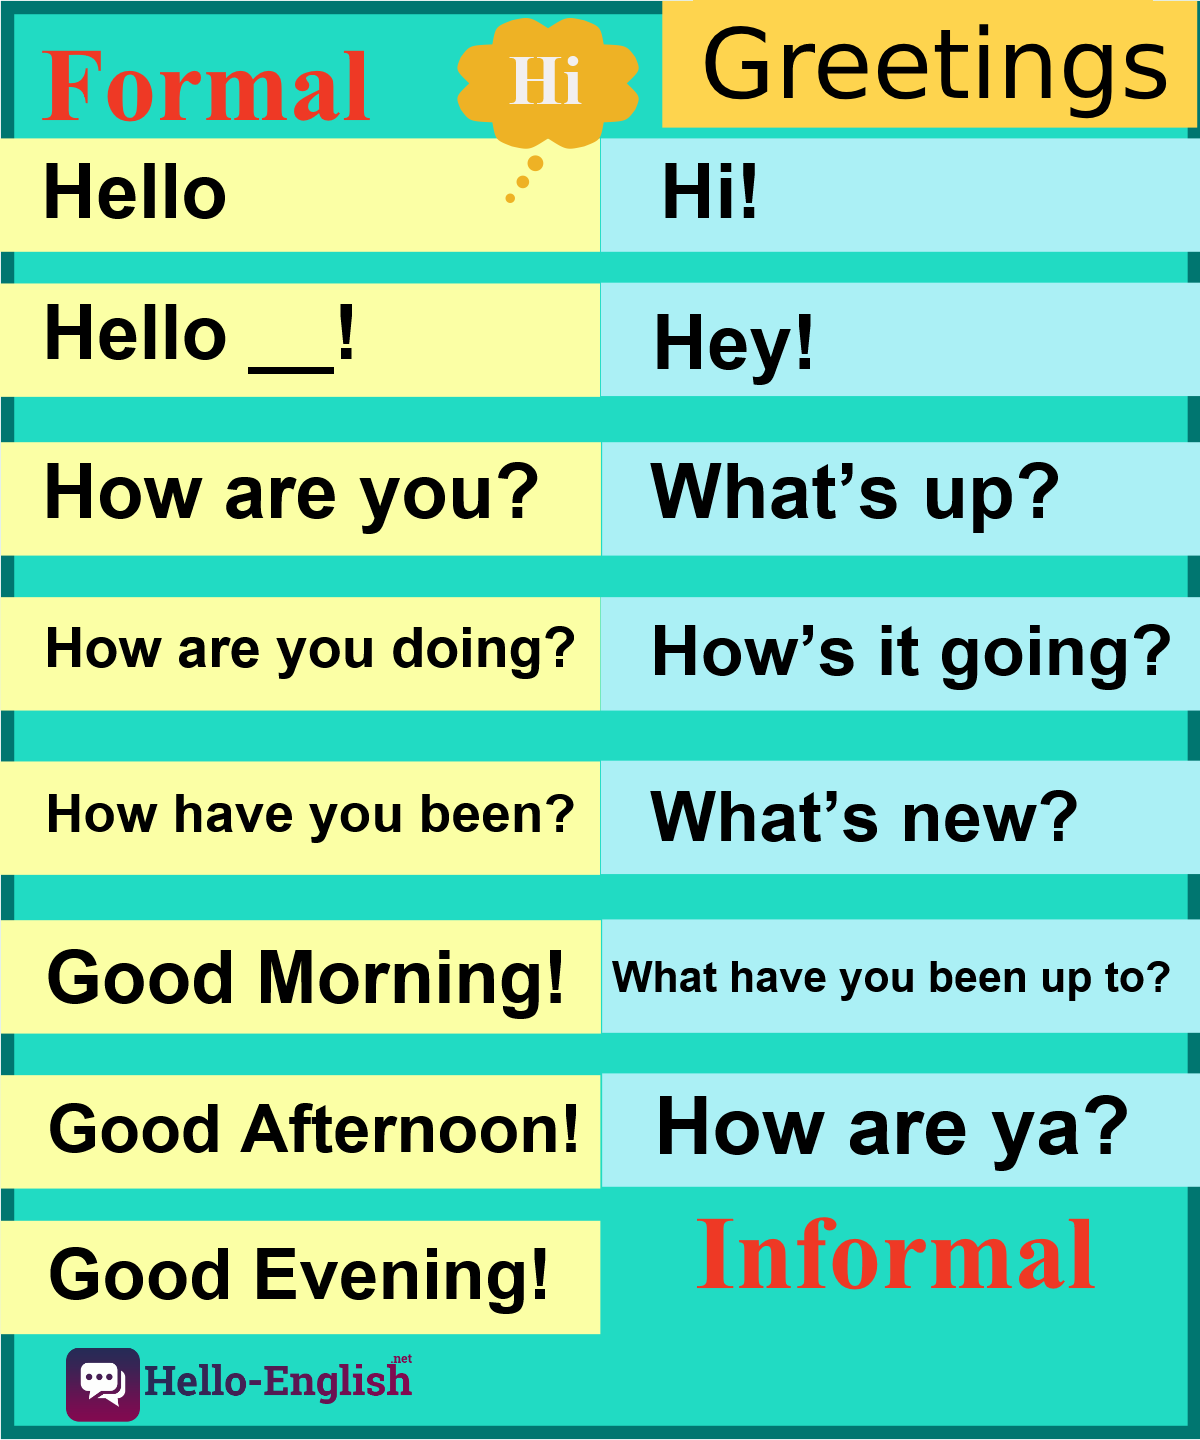 Words and their forms. Formal informal английский. Greetings на английском. Formal and informal Greetings. Formal Greetings in English.